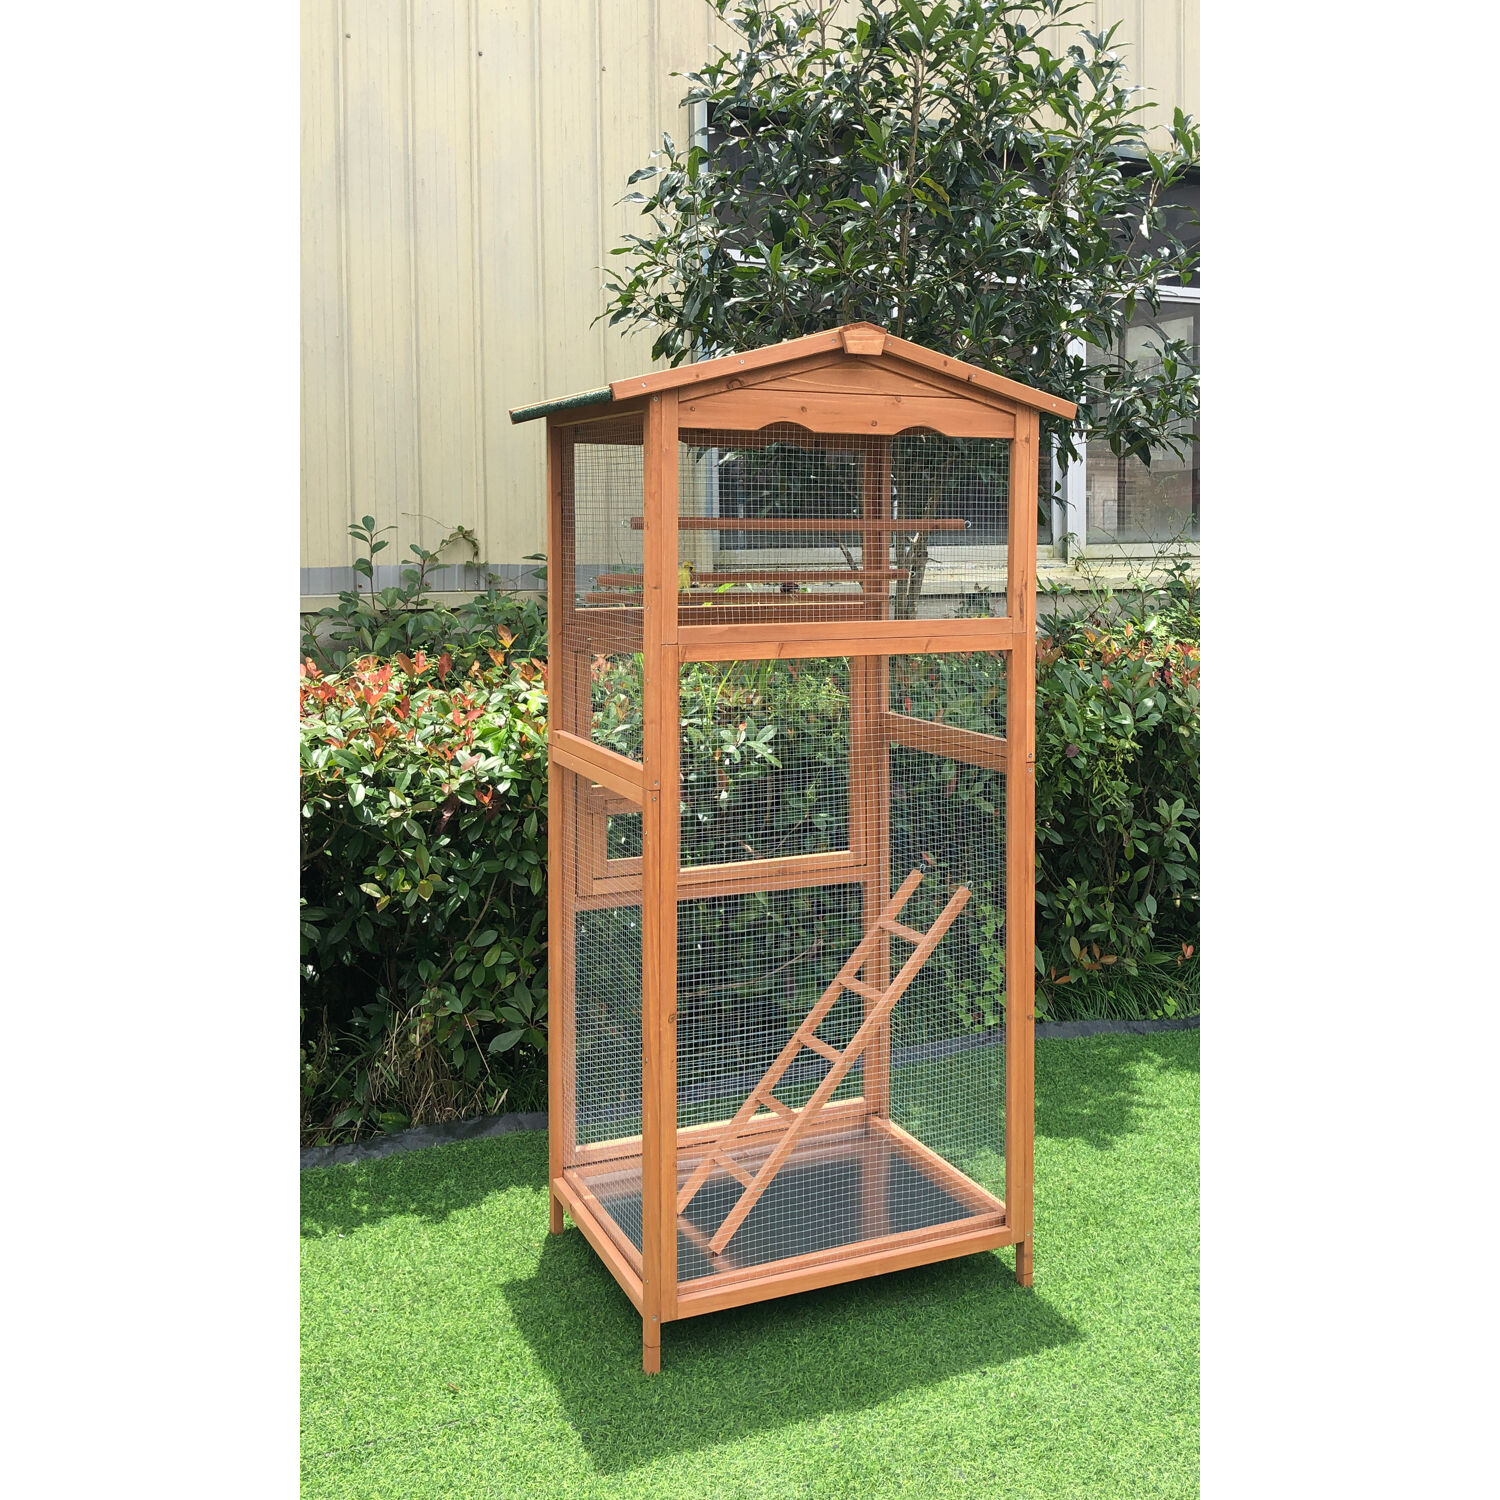 Hanover Outdoor Wooden Bird Cage with 3 Resting Bars, Ladder, Waterproof Roof and Removable Tray, 2.9 Ft. x 2.1 Ft. x 5.8 Ft. - image 5 of 12